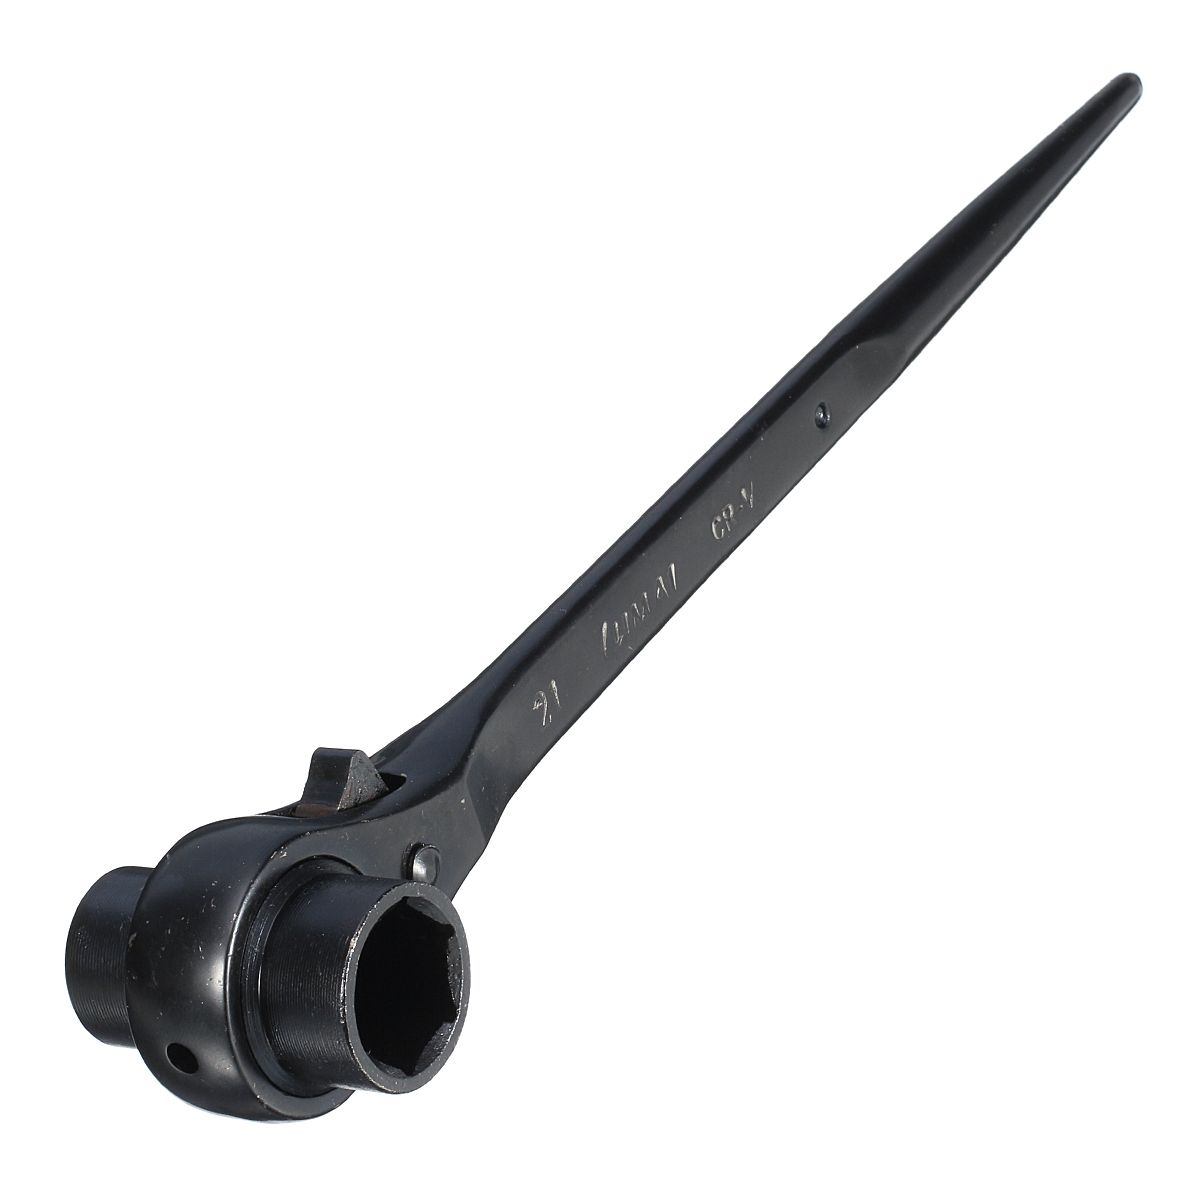 5-Sizes-Spanner-Scaffold-Podger-Ratchet-Site-Ratcheting-Socket-Wrench-Tools-1323150